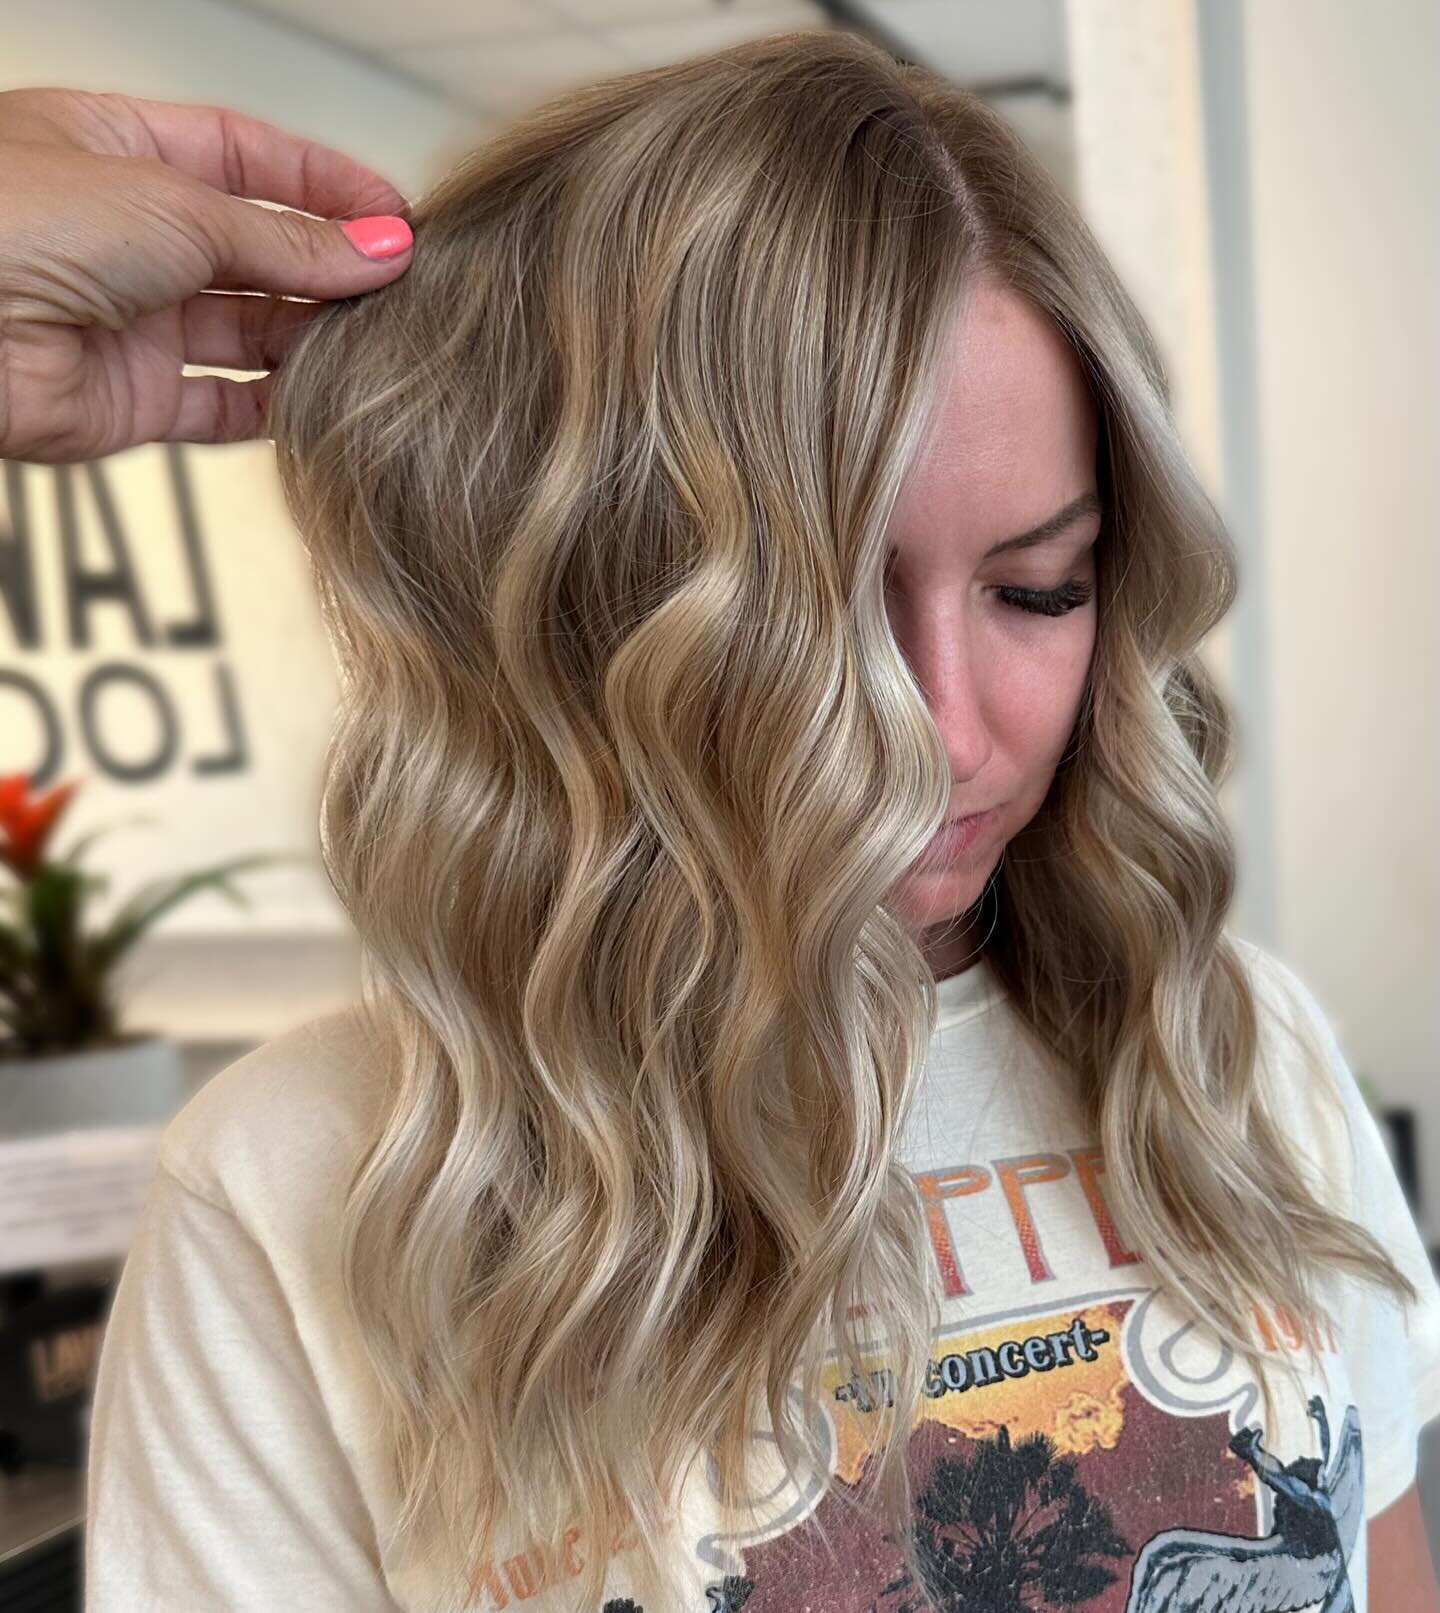 Dimensional Blonde Balayage
.
So grateful for this babe, she drives almost 2 hours to come see me🥰 
Love our time together catching up while making yummy hair!
.
.
#oligopro #utahhair#utahcolorist#utahsalon#utahbalayage#balayageutah